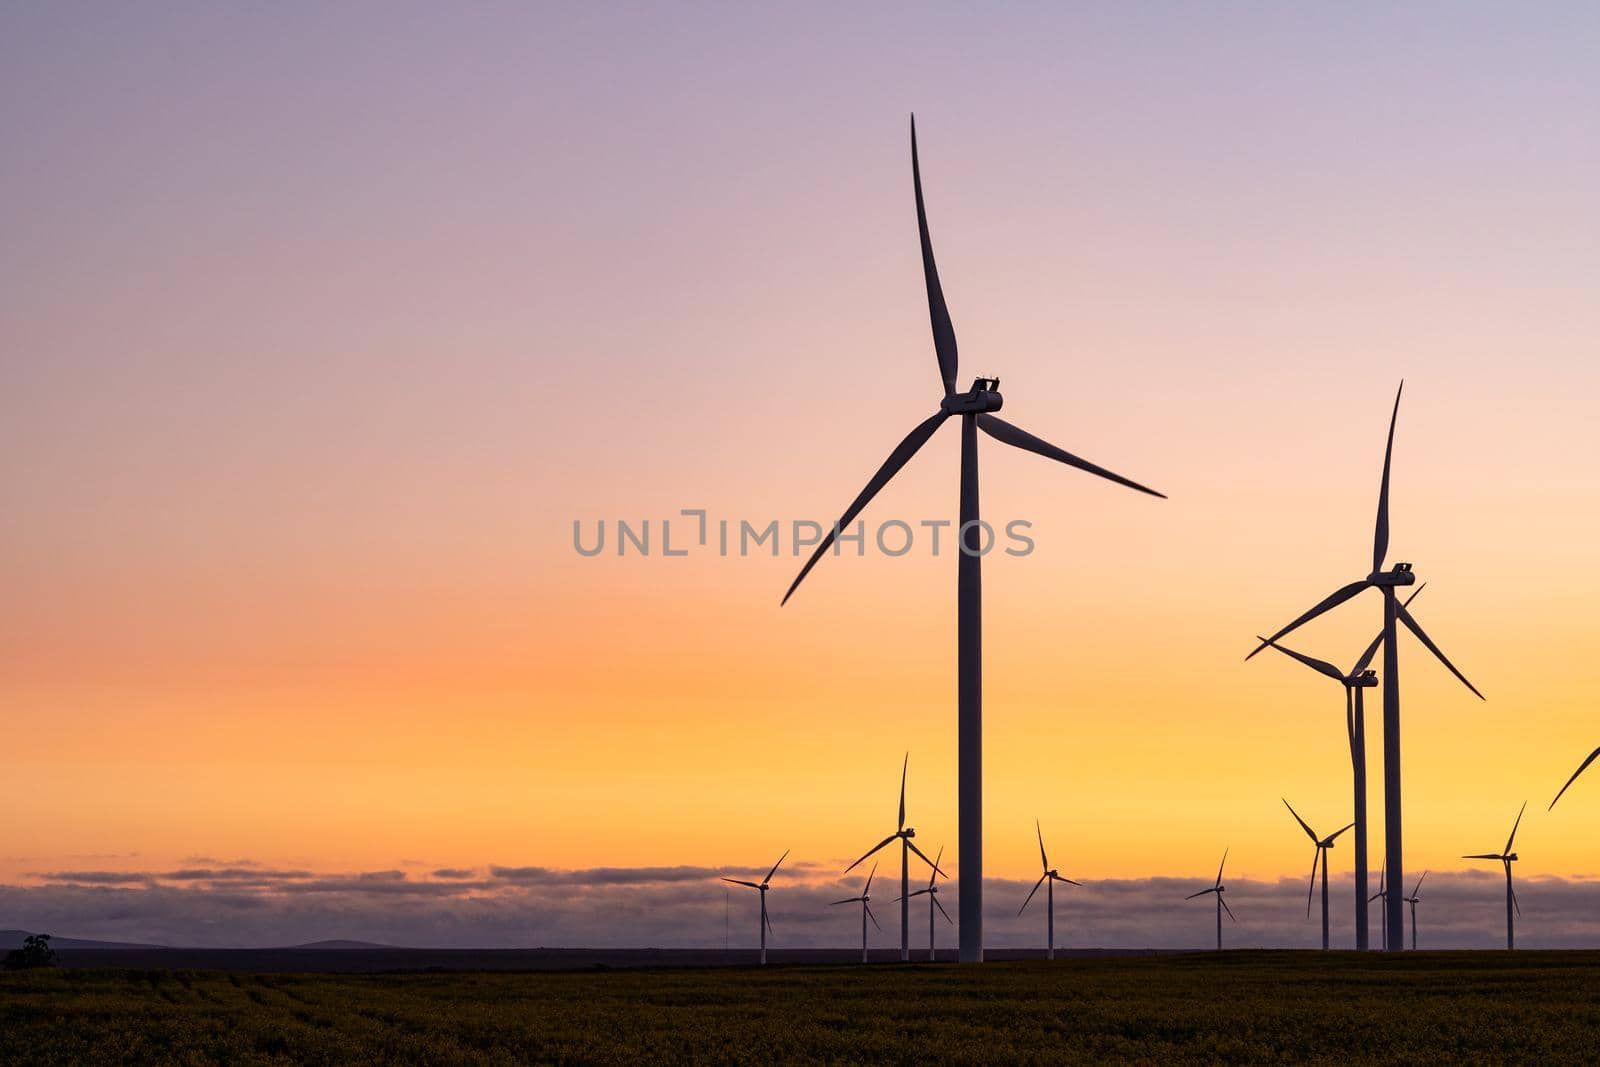 General view of wind turbines in countryside landscape during sunset by Wavebreakmedia